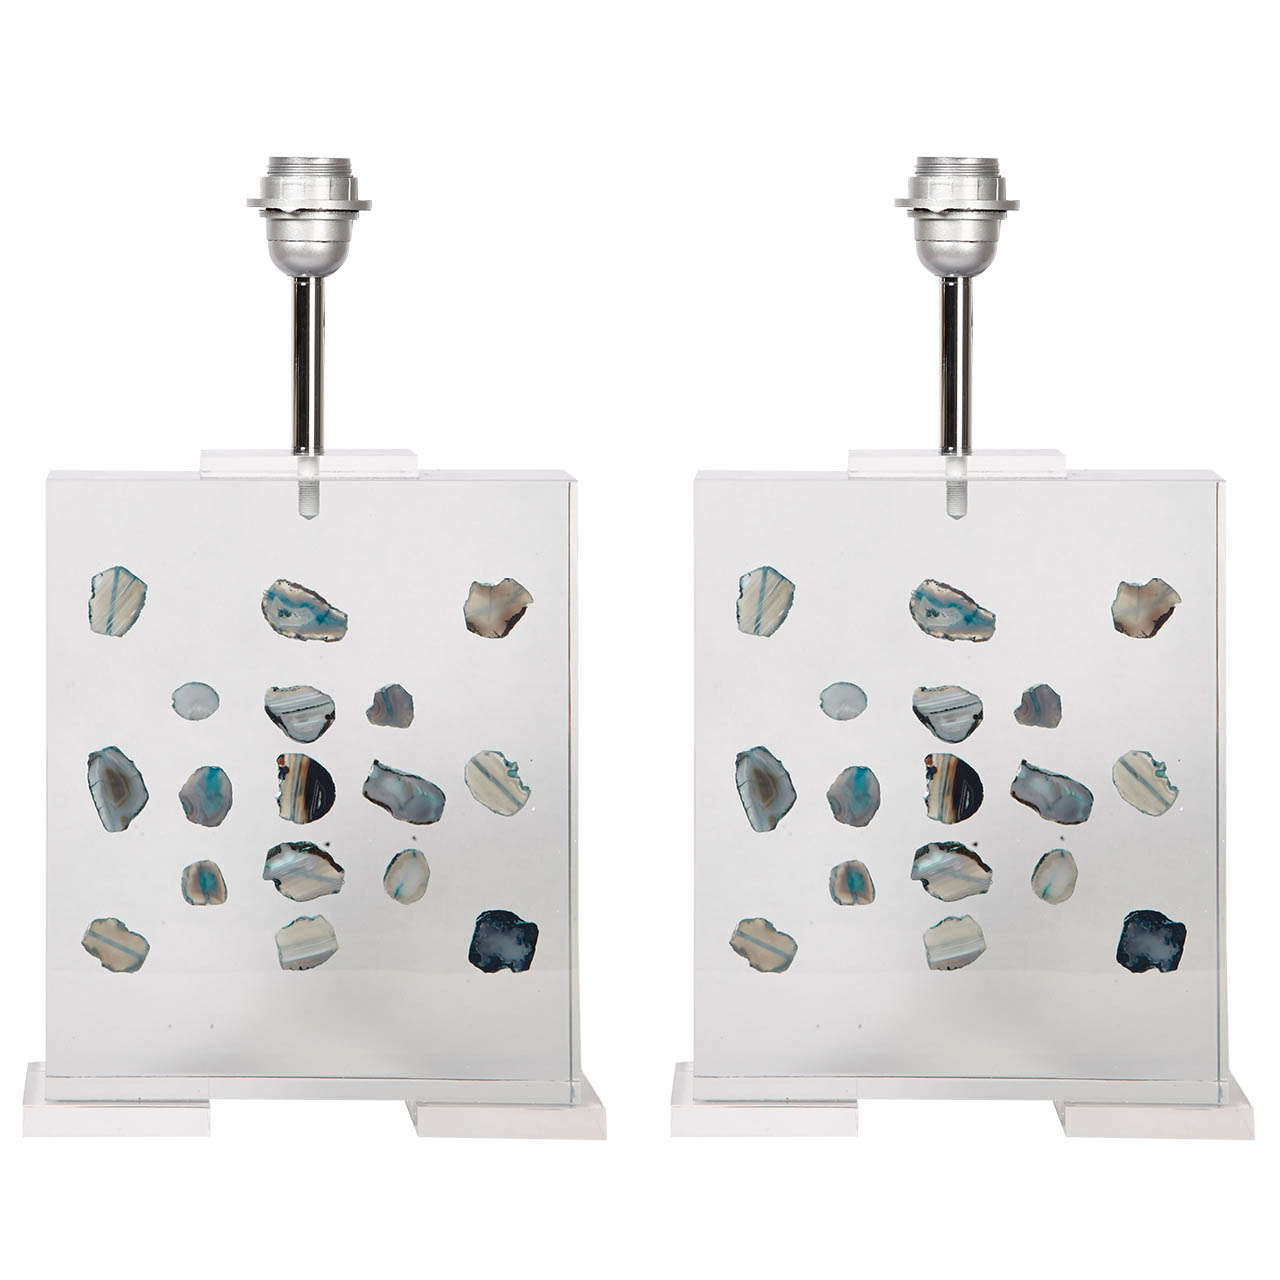 Fantastic pair of lamps in lucite with inclusion of small blue agates